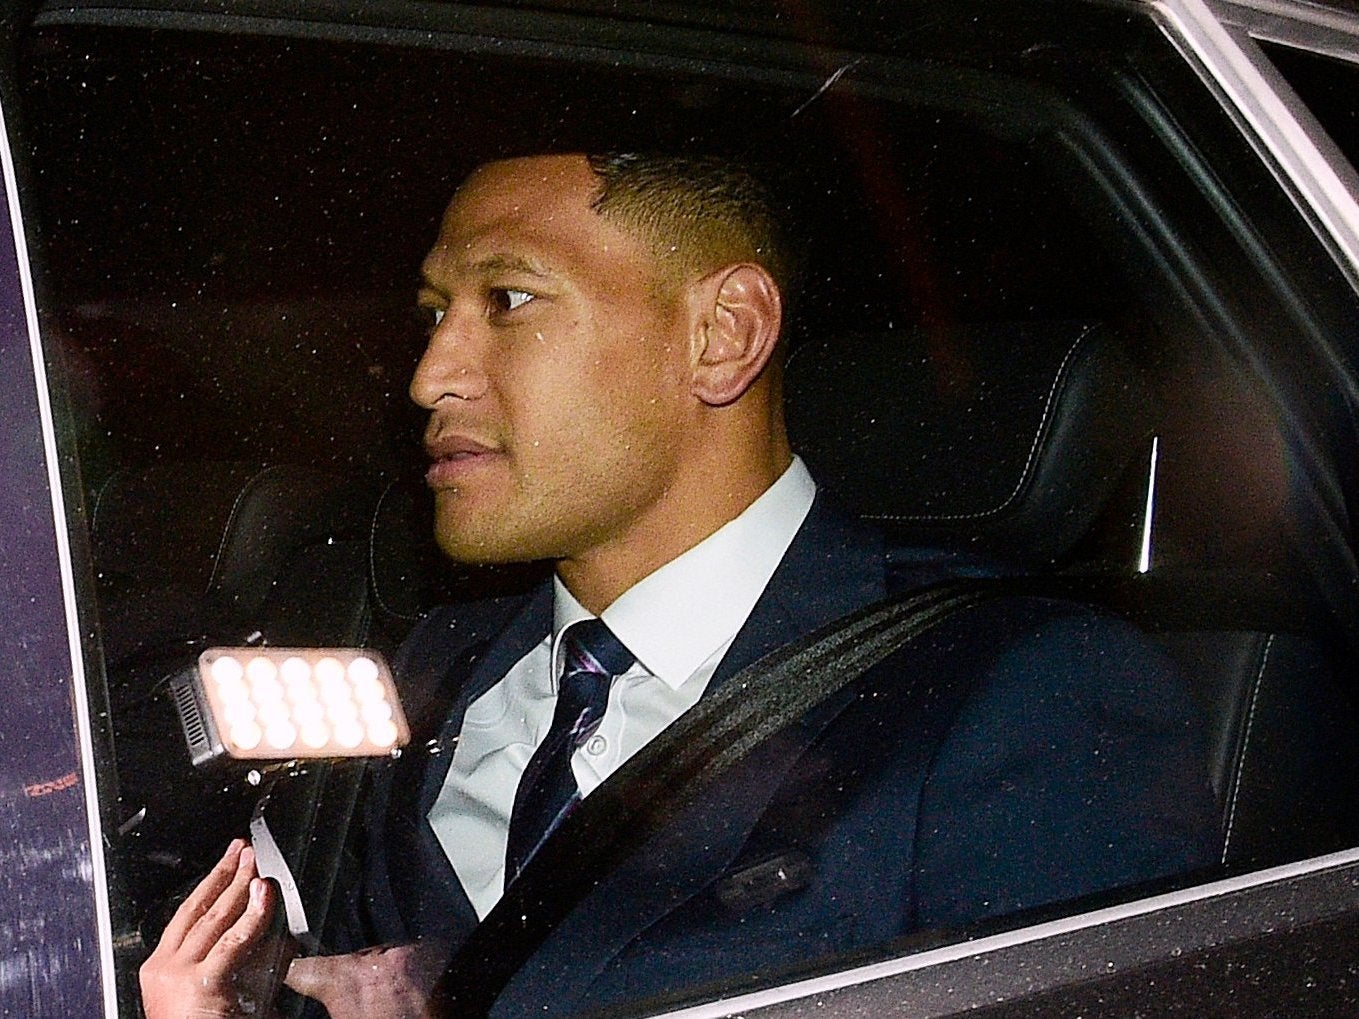 Folau has been found guilty of a high-level breach of the Code of Conduct